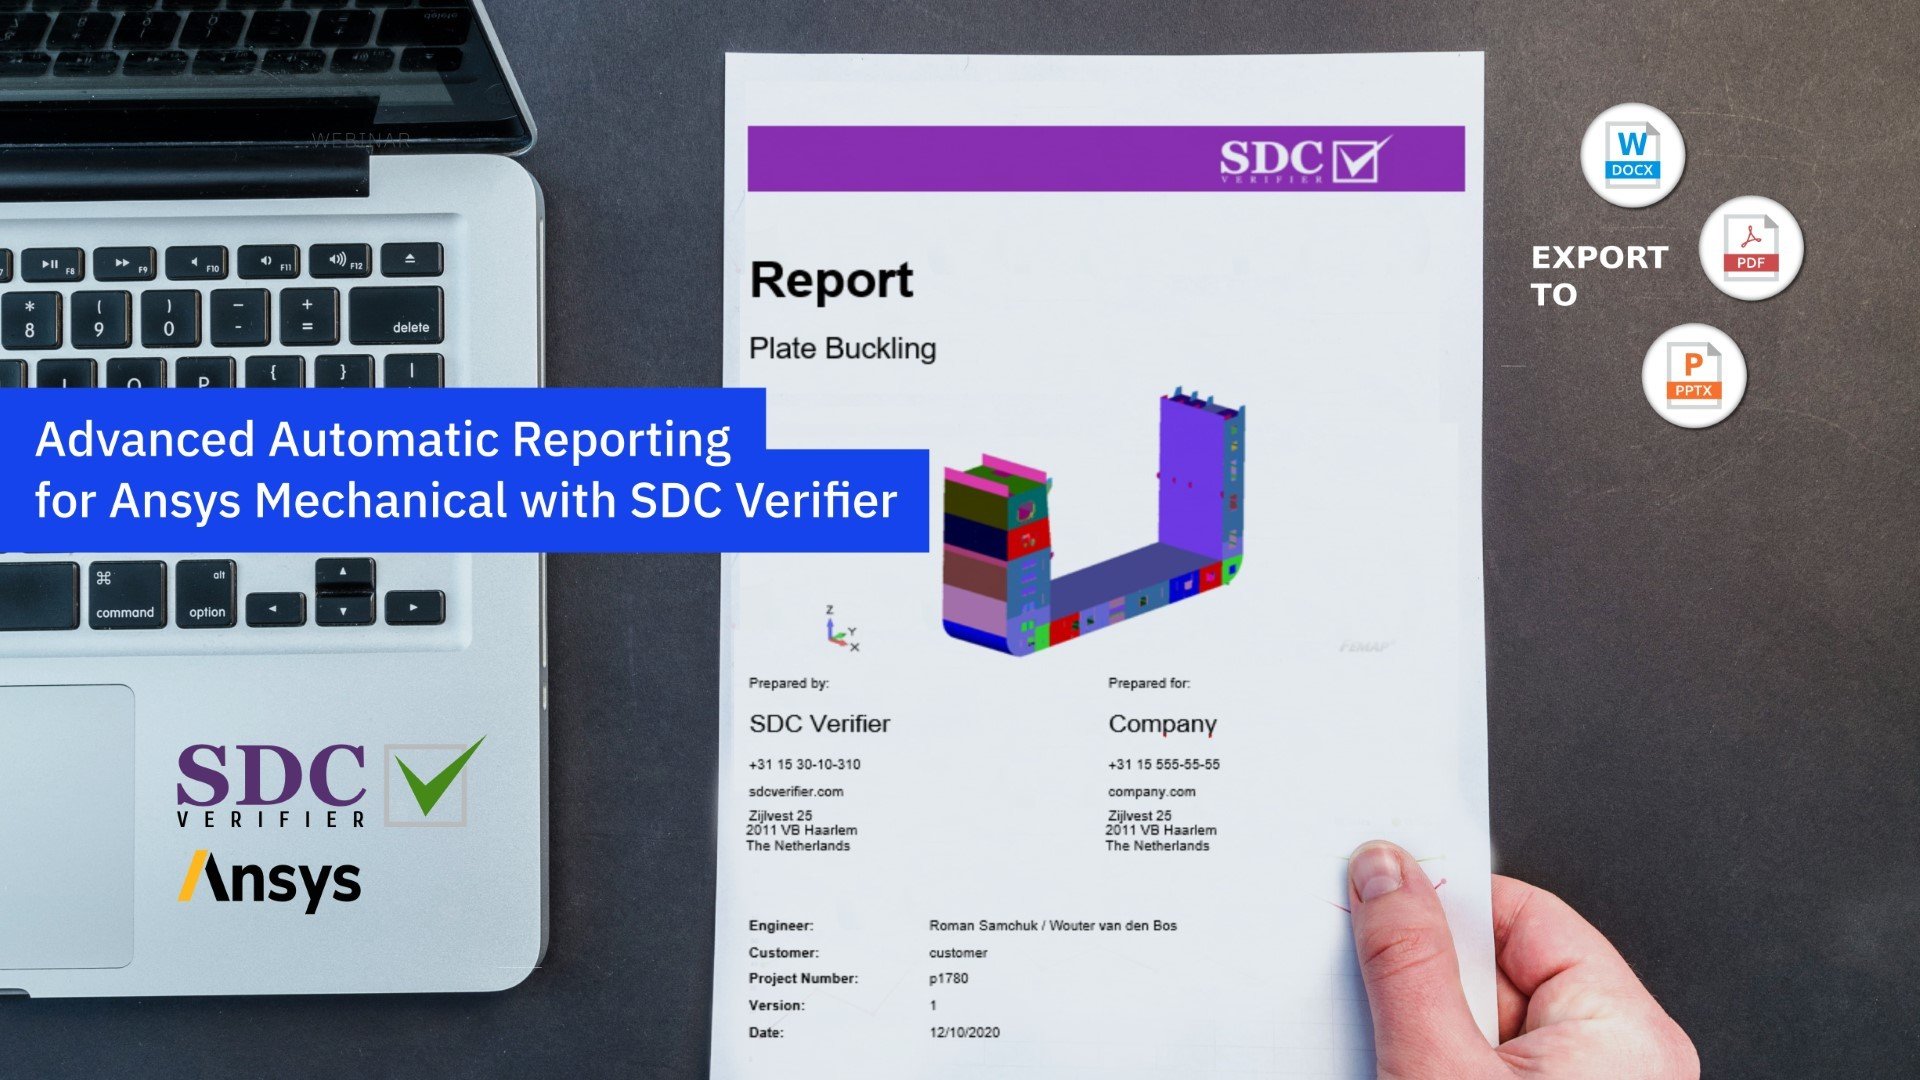 Advanced Automatic Reporting for Ansys Mechanical with SDC Verifier